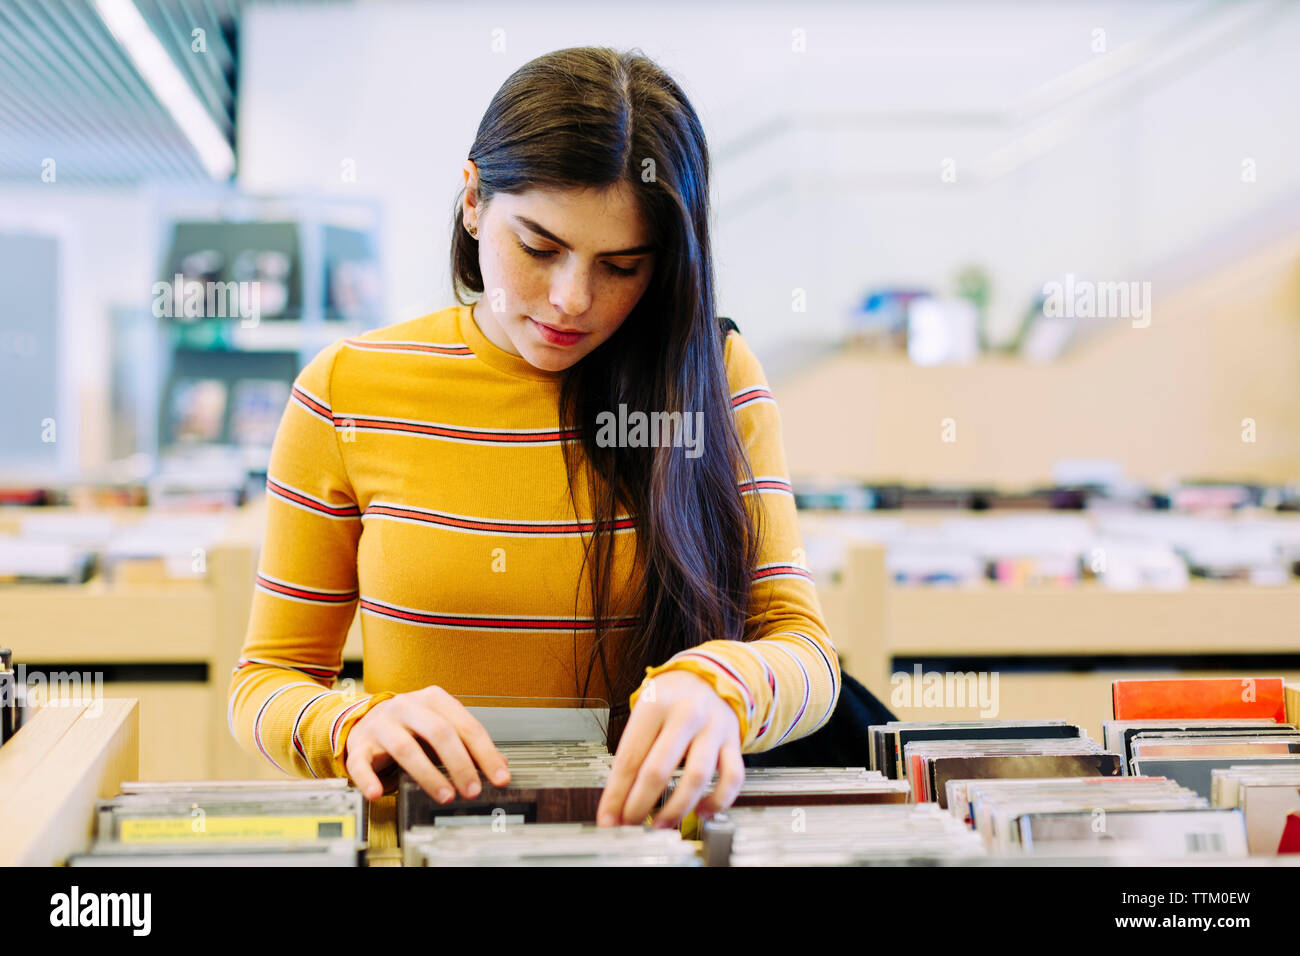 Woman searching book in shelf at library Stock Photo